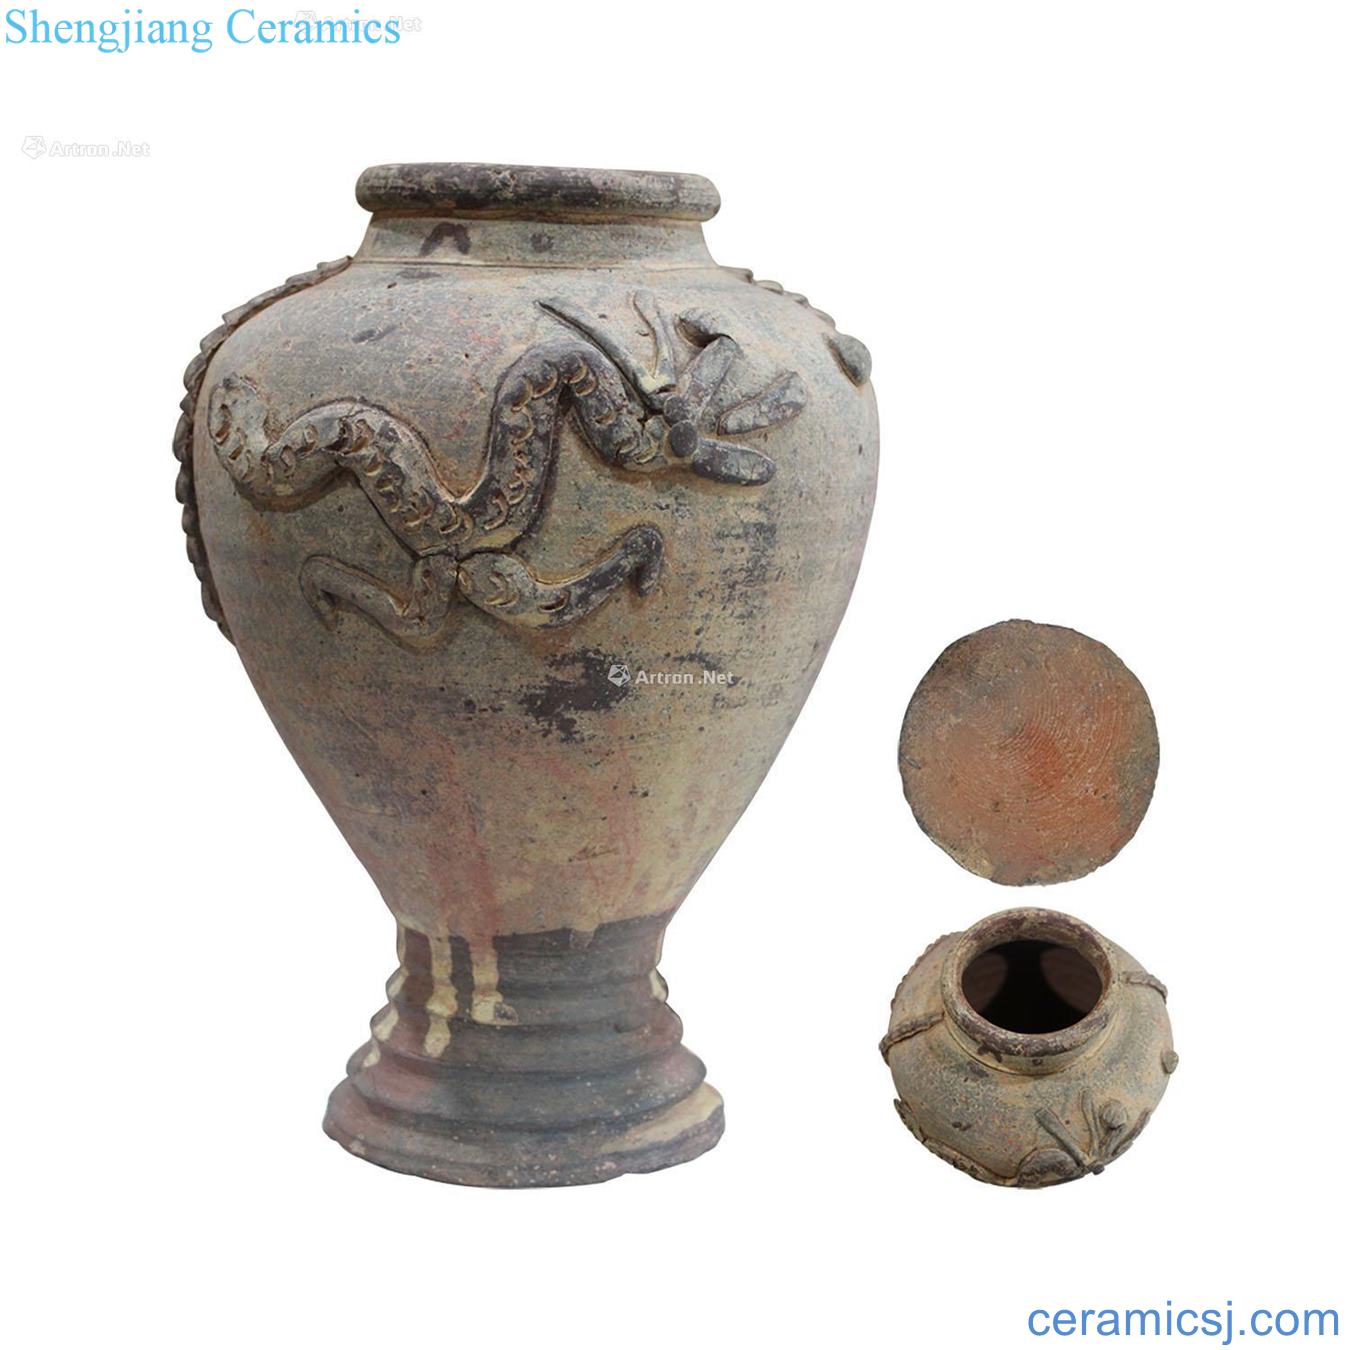 The song dynasty tower dragon cans